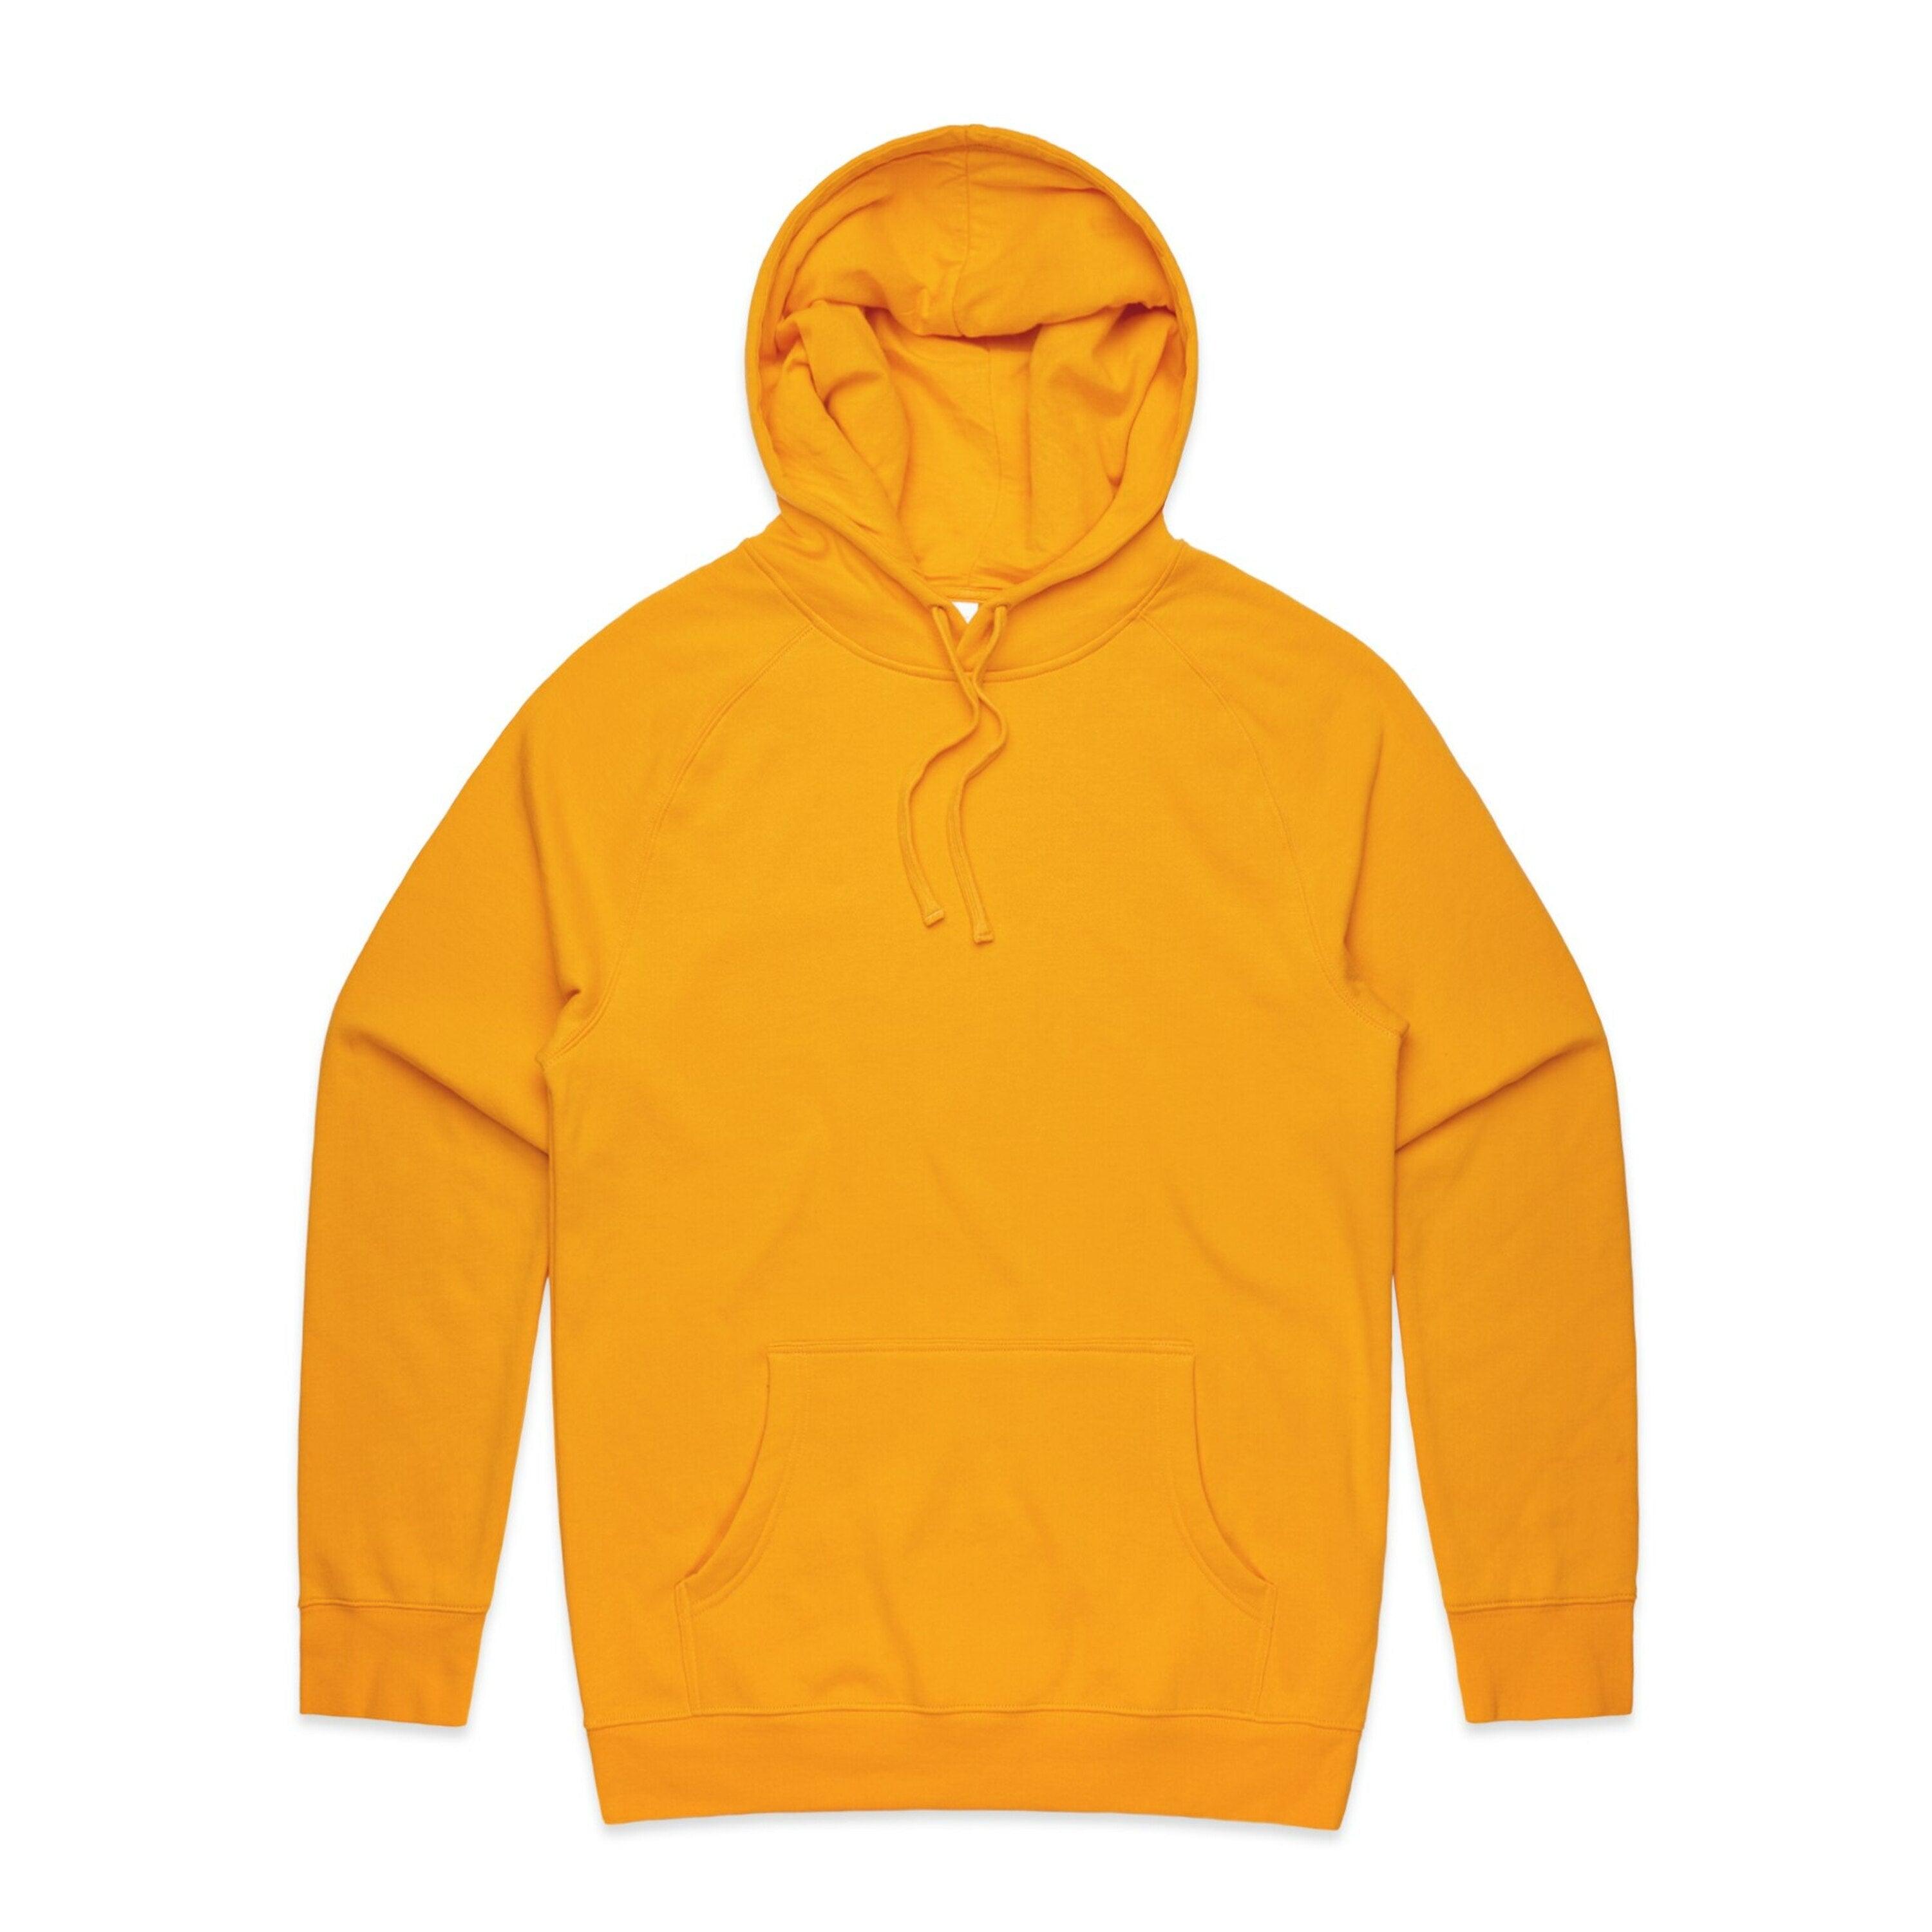 MENS SUPPLY HOOD - Colortex Screen Printing & Embroidery